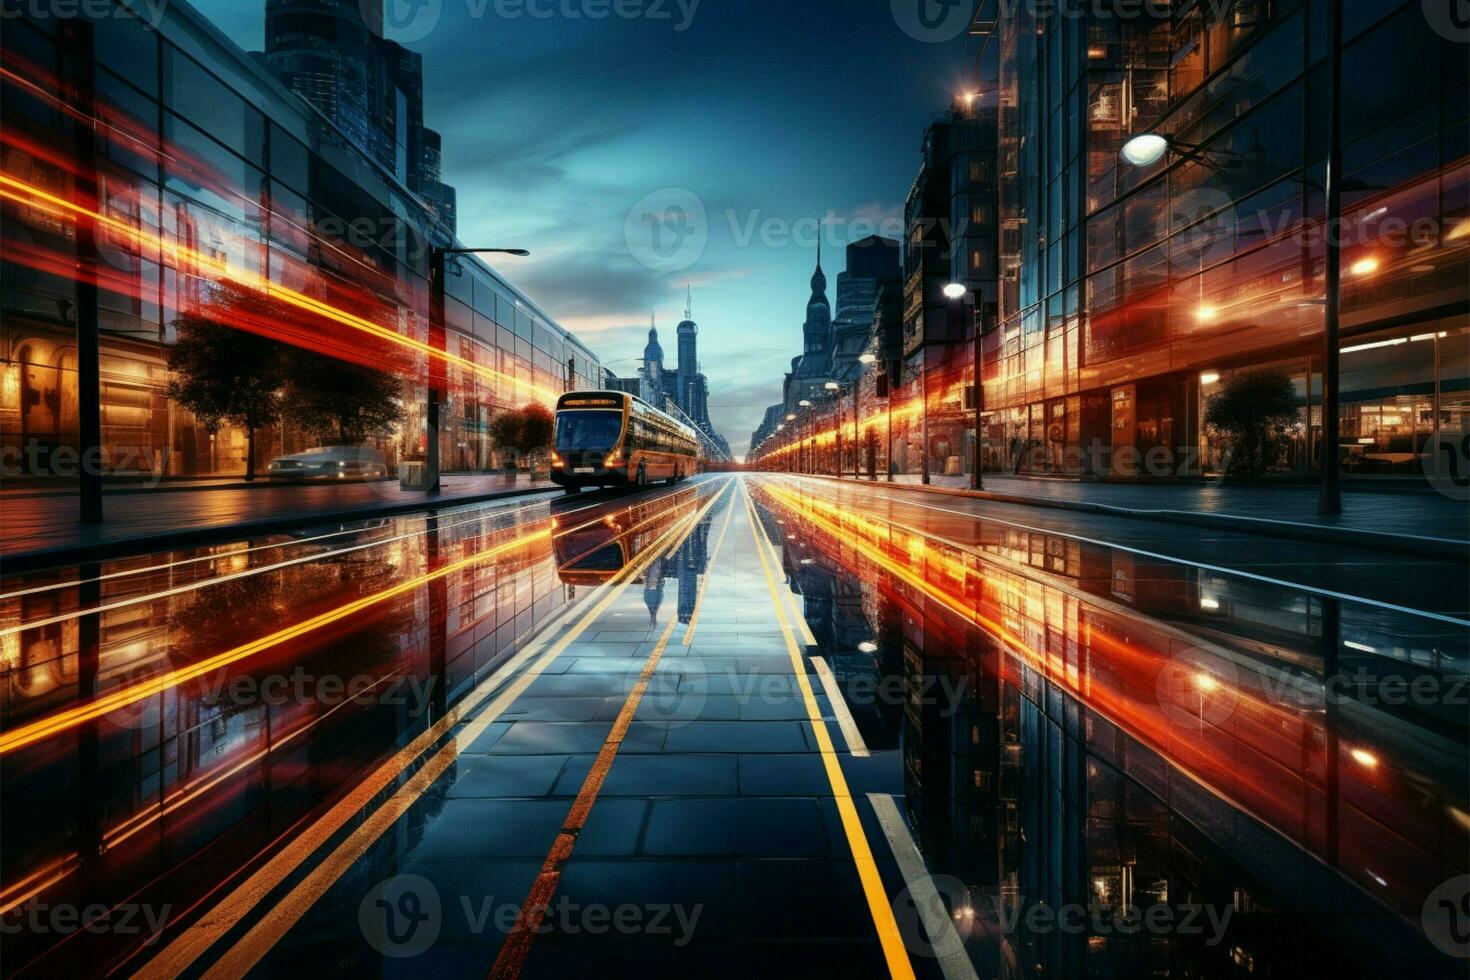 Nocturnal energy Light trails on street capture citys dynamic nature amidst cityscape AI Generated photo